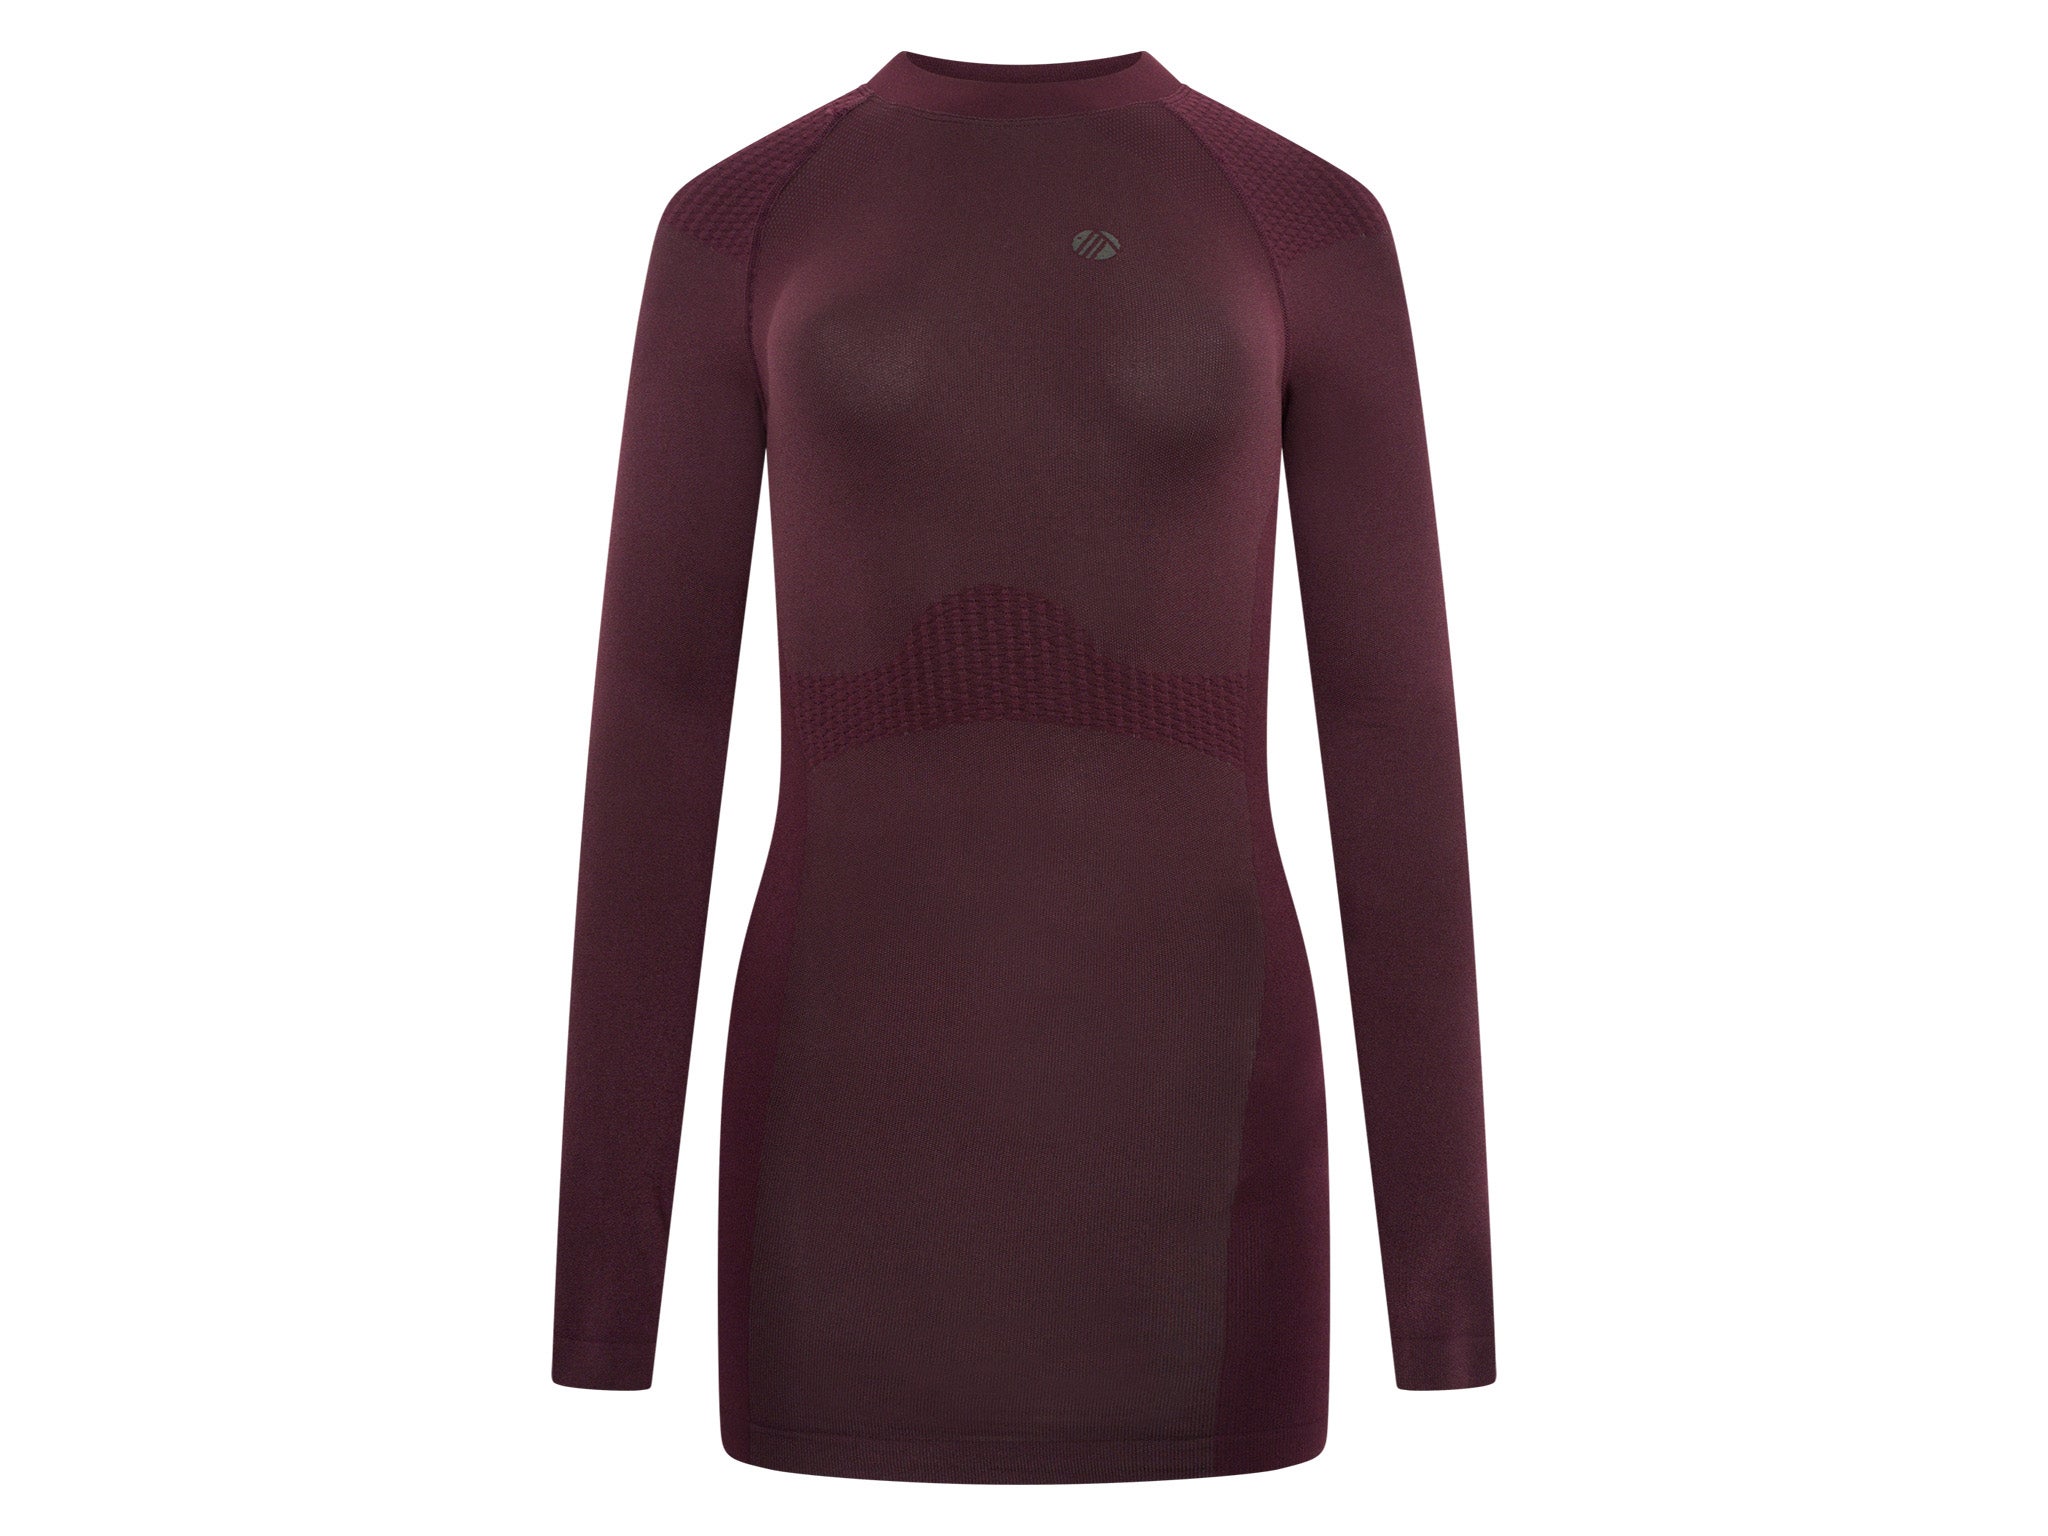 acai-seamless-Indybest-baselayer-review